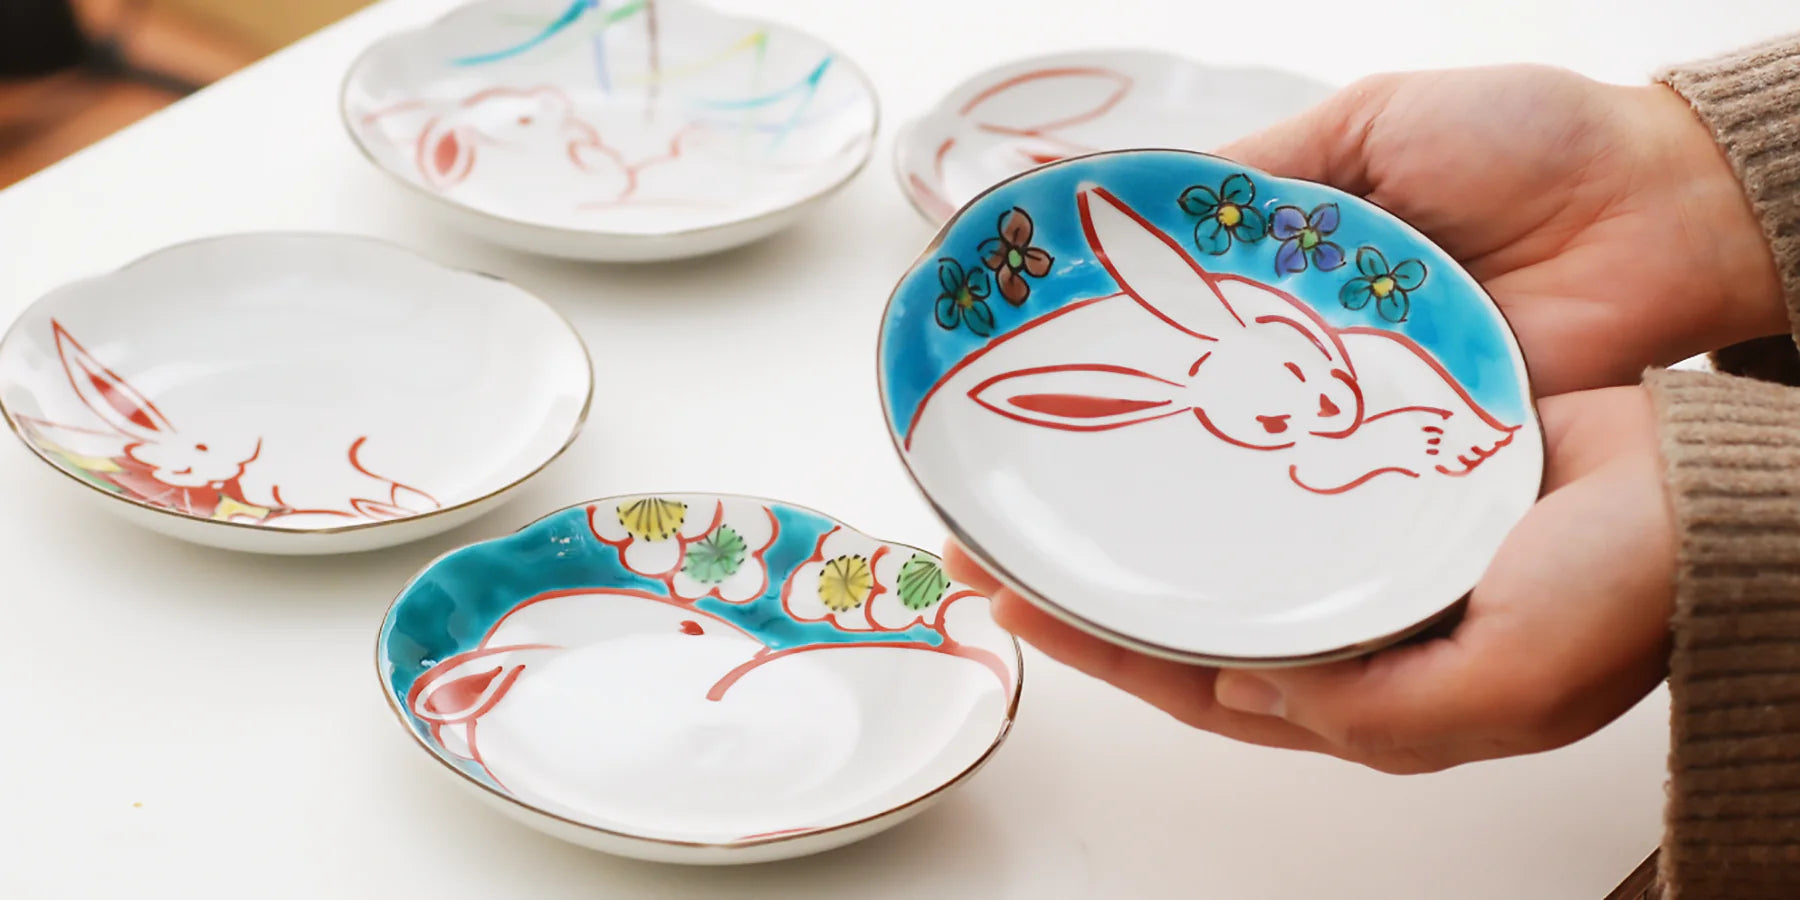 Discover our great selection of Japanese Pottery & Porcelain at Globalkitchen Japan.